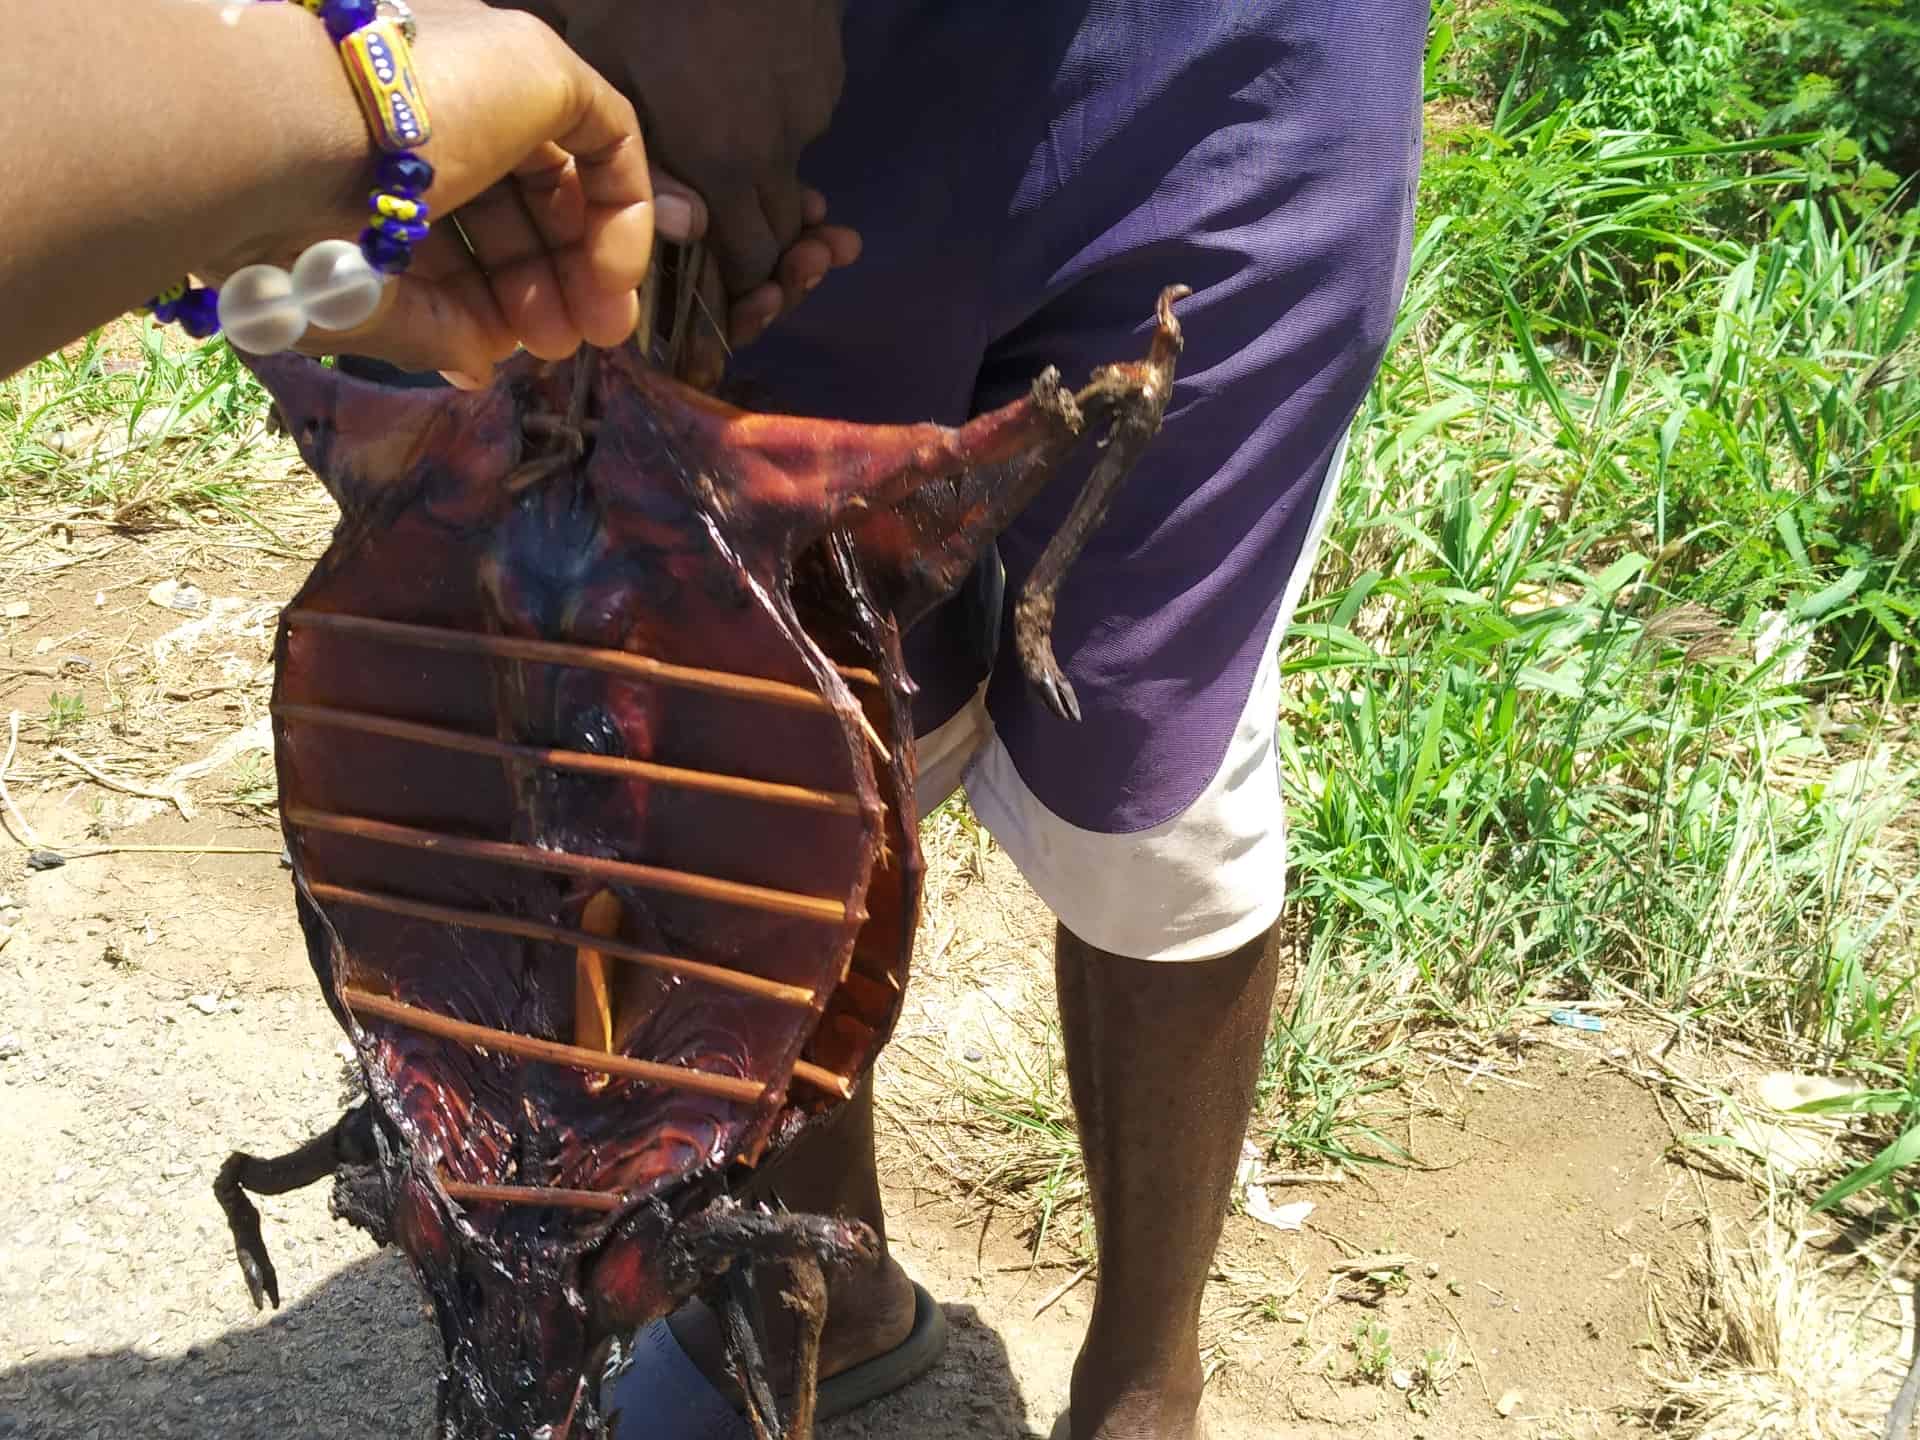 A person holds the carcass of an animal